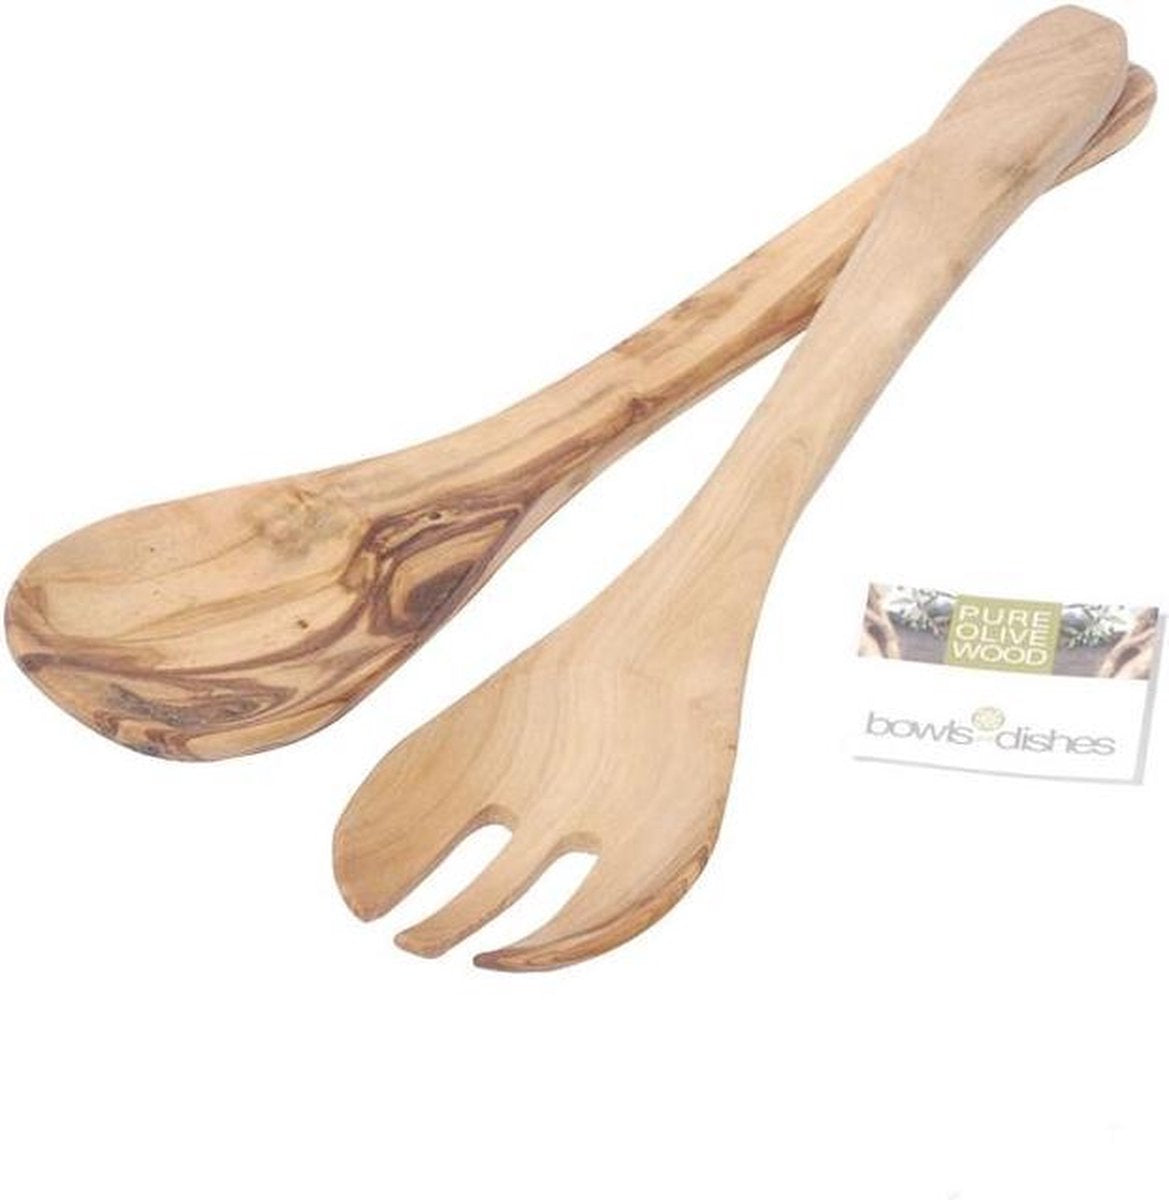 Bowls and Dishes Salad Servers